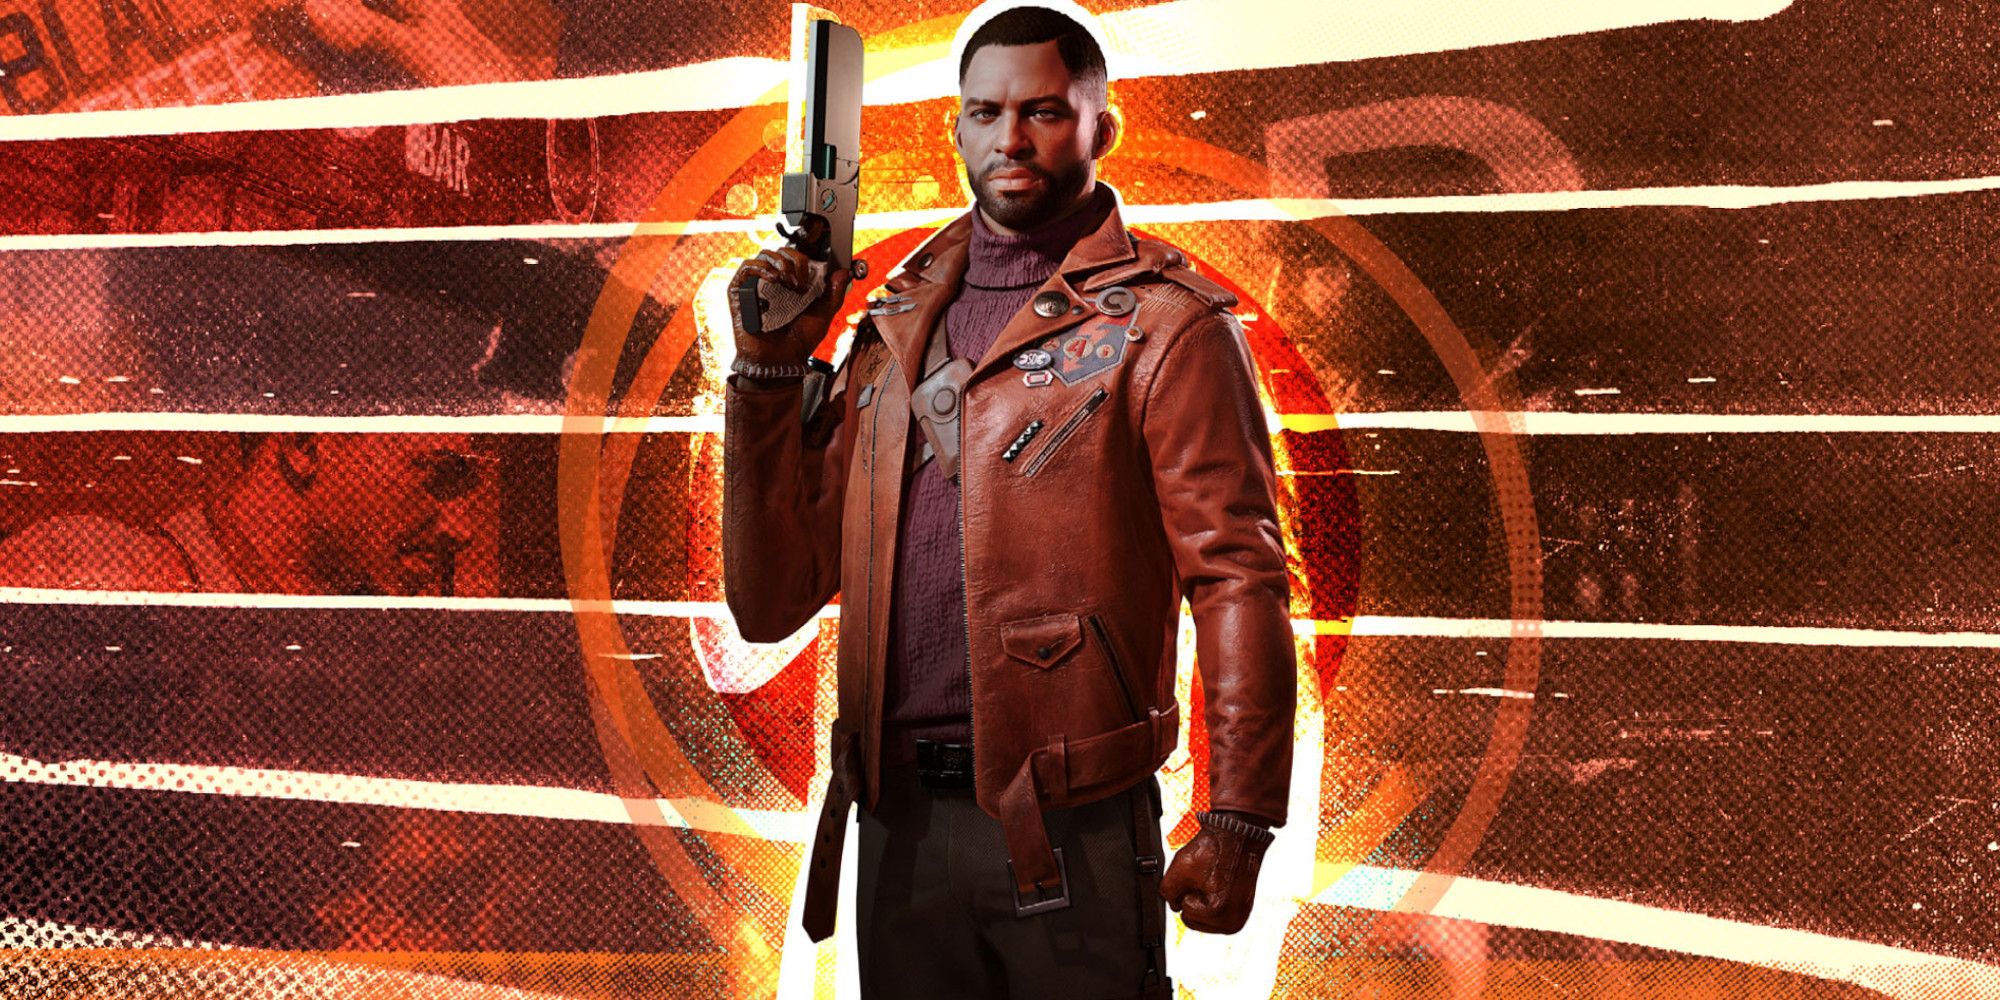 The male variant of the main character poses with a handgun